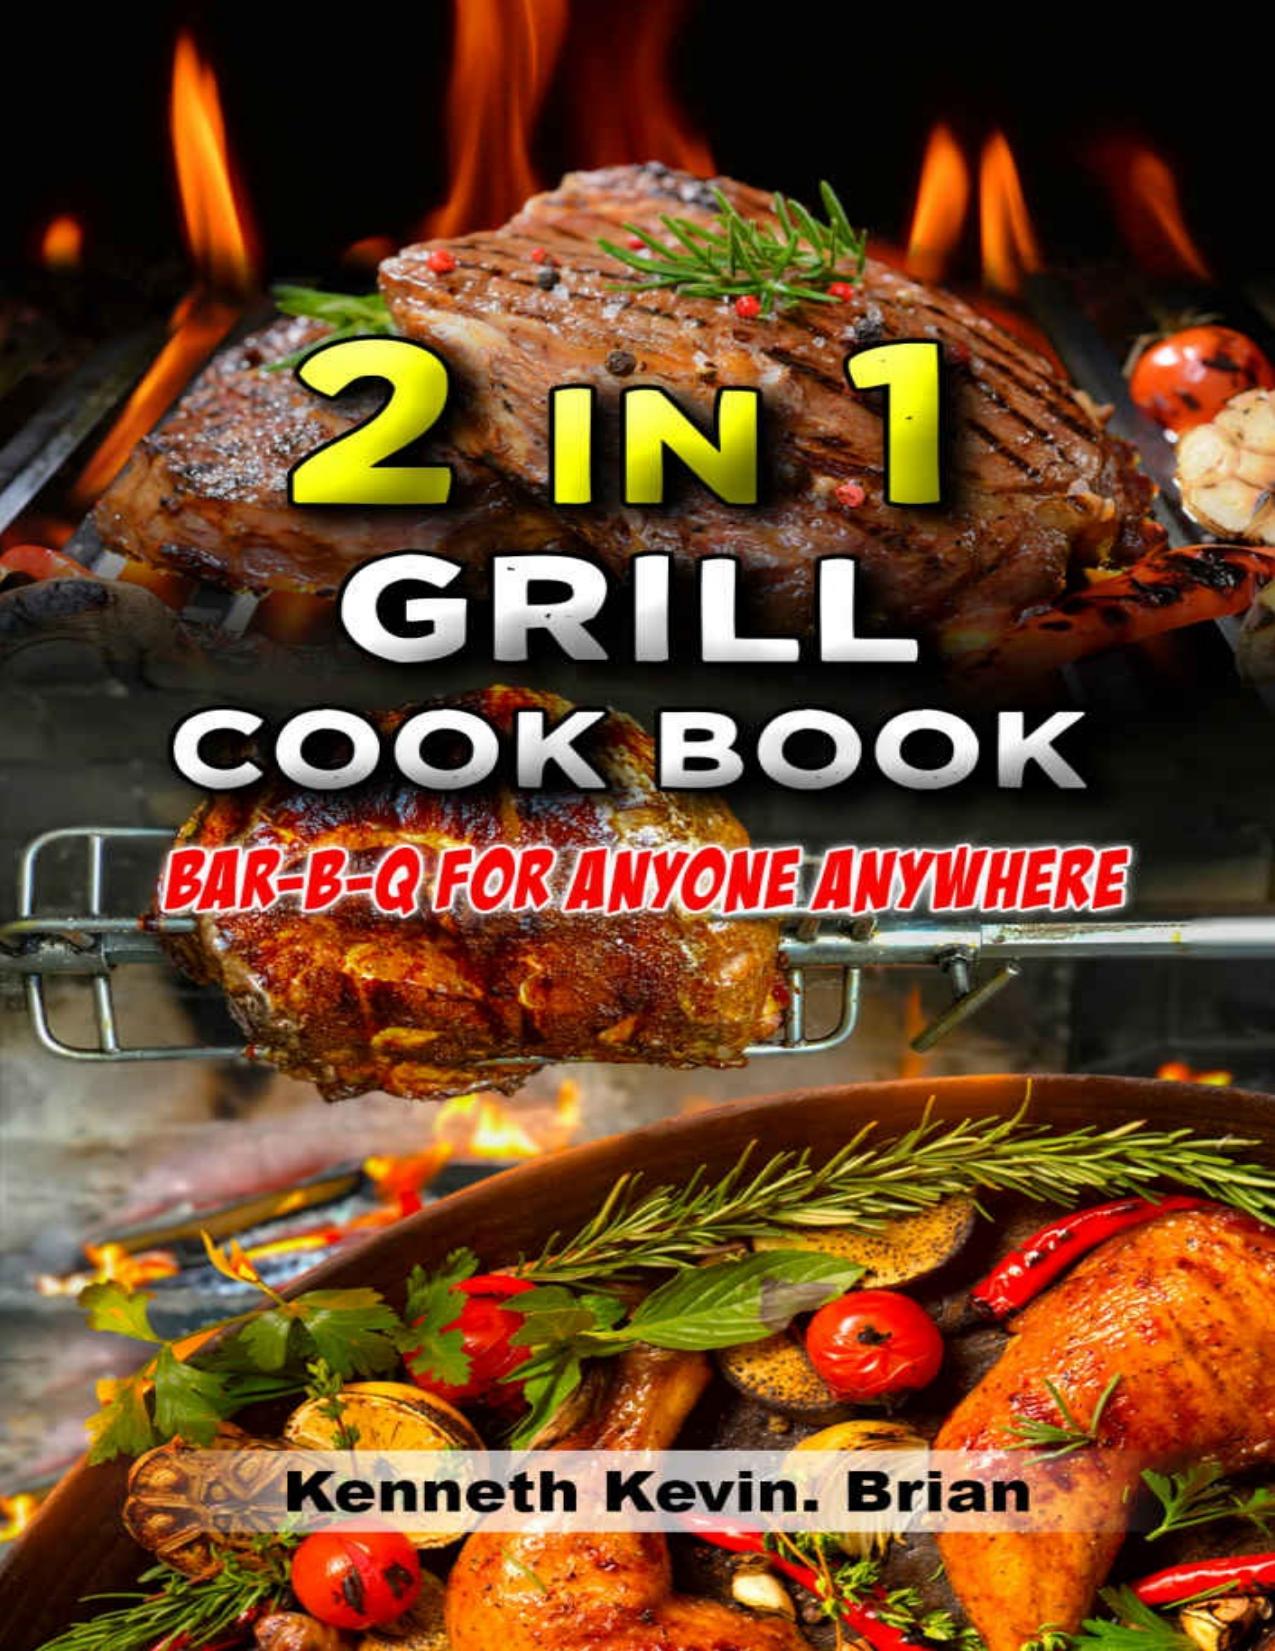 2 in 1 grill cookbook: Bar-b-q for anyone anywhere by Kenneth Kevin. Brian